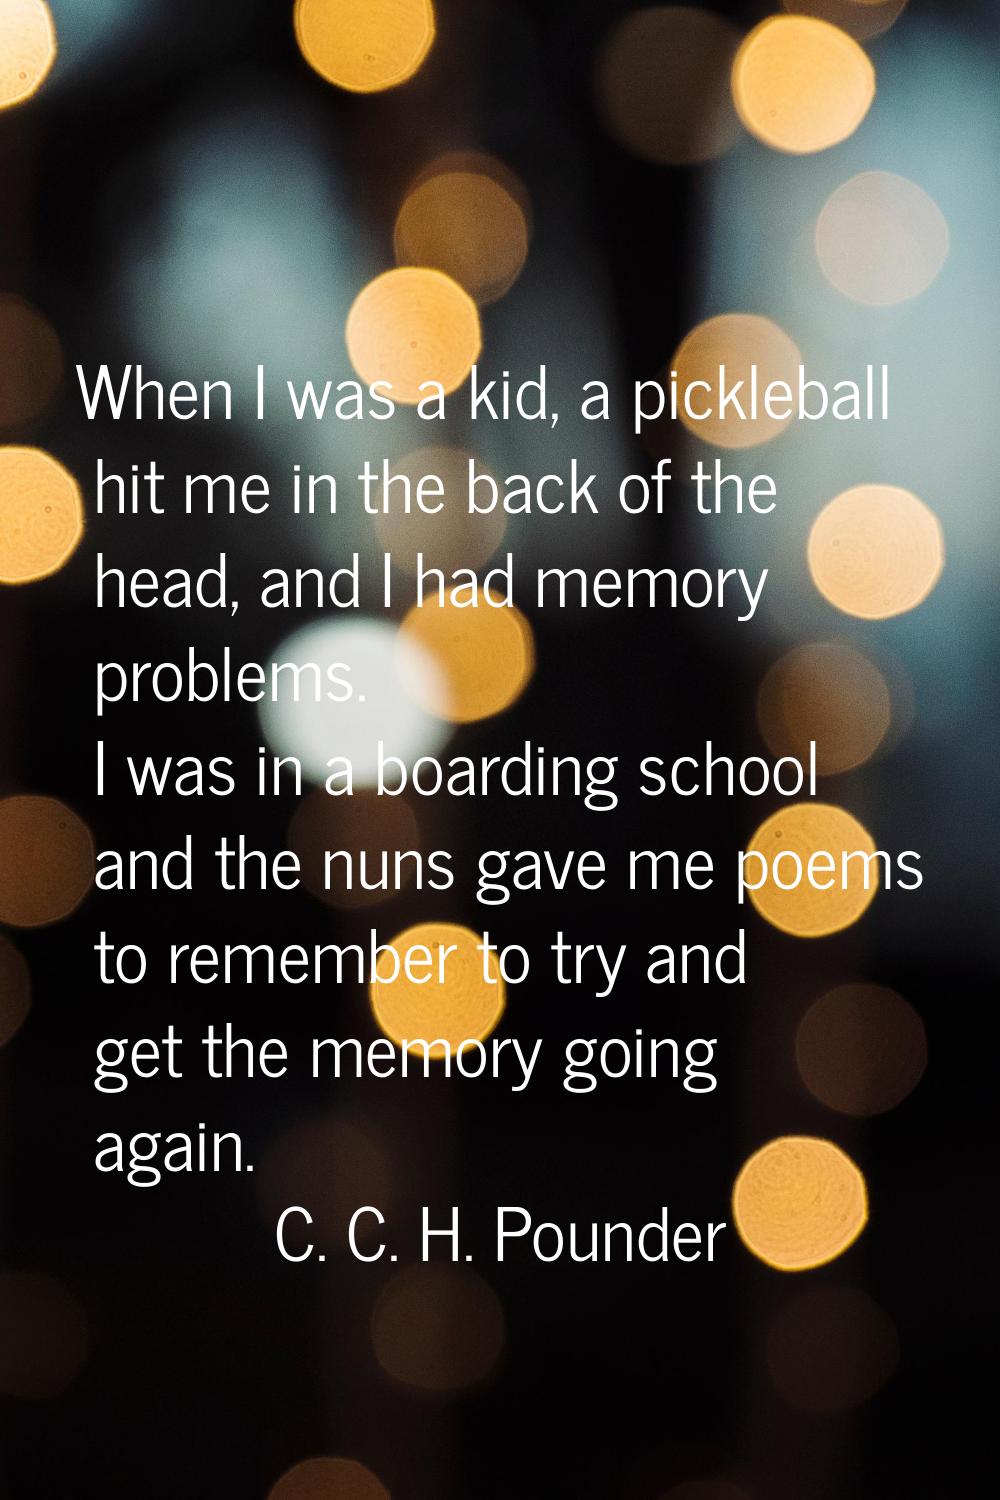 When I was a kid, a pickleball hit me in the back of the head, and I had memory problems. I was in 